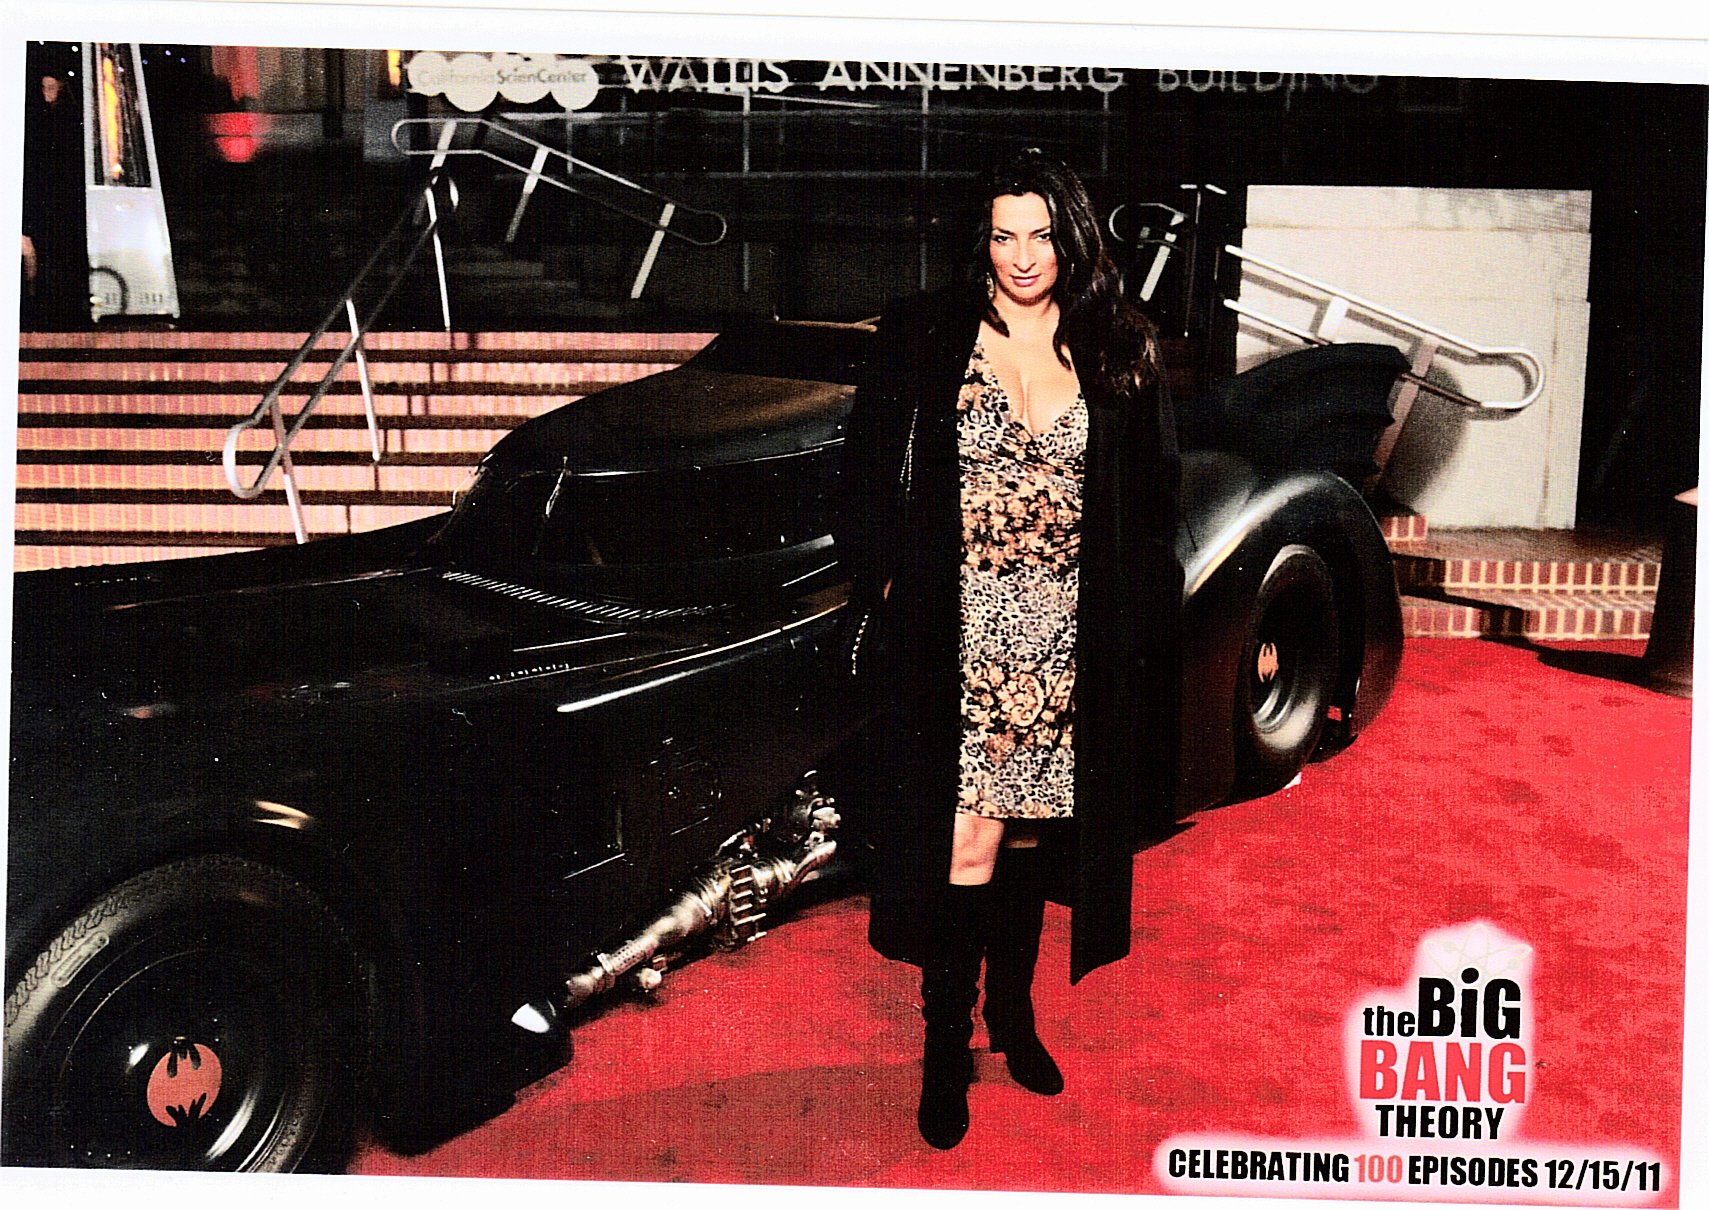 Alice Amter arrives at the 100th Episode Celebration of The Big Bang Theory, Thursday December 14th 2011.